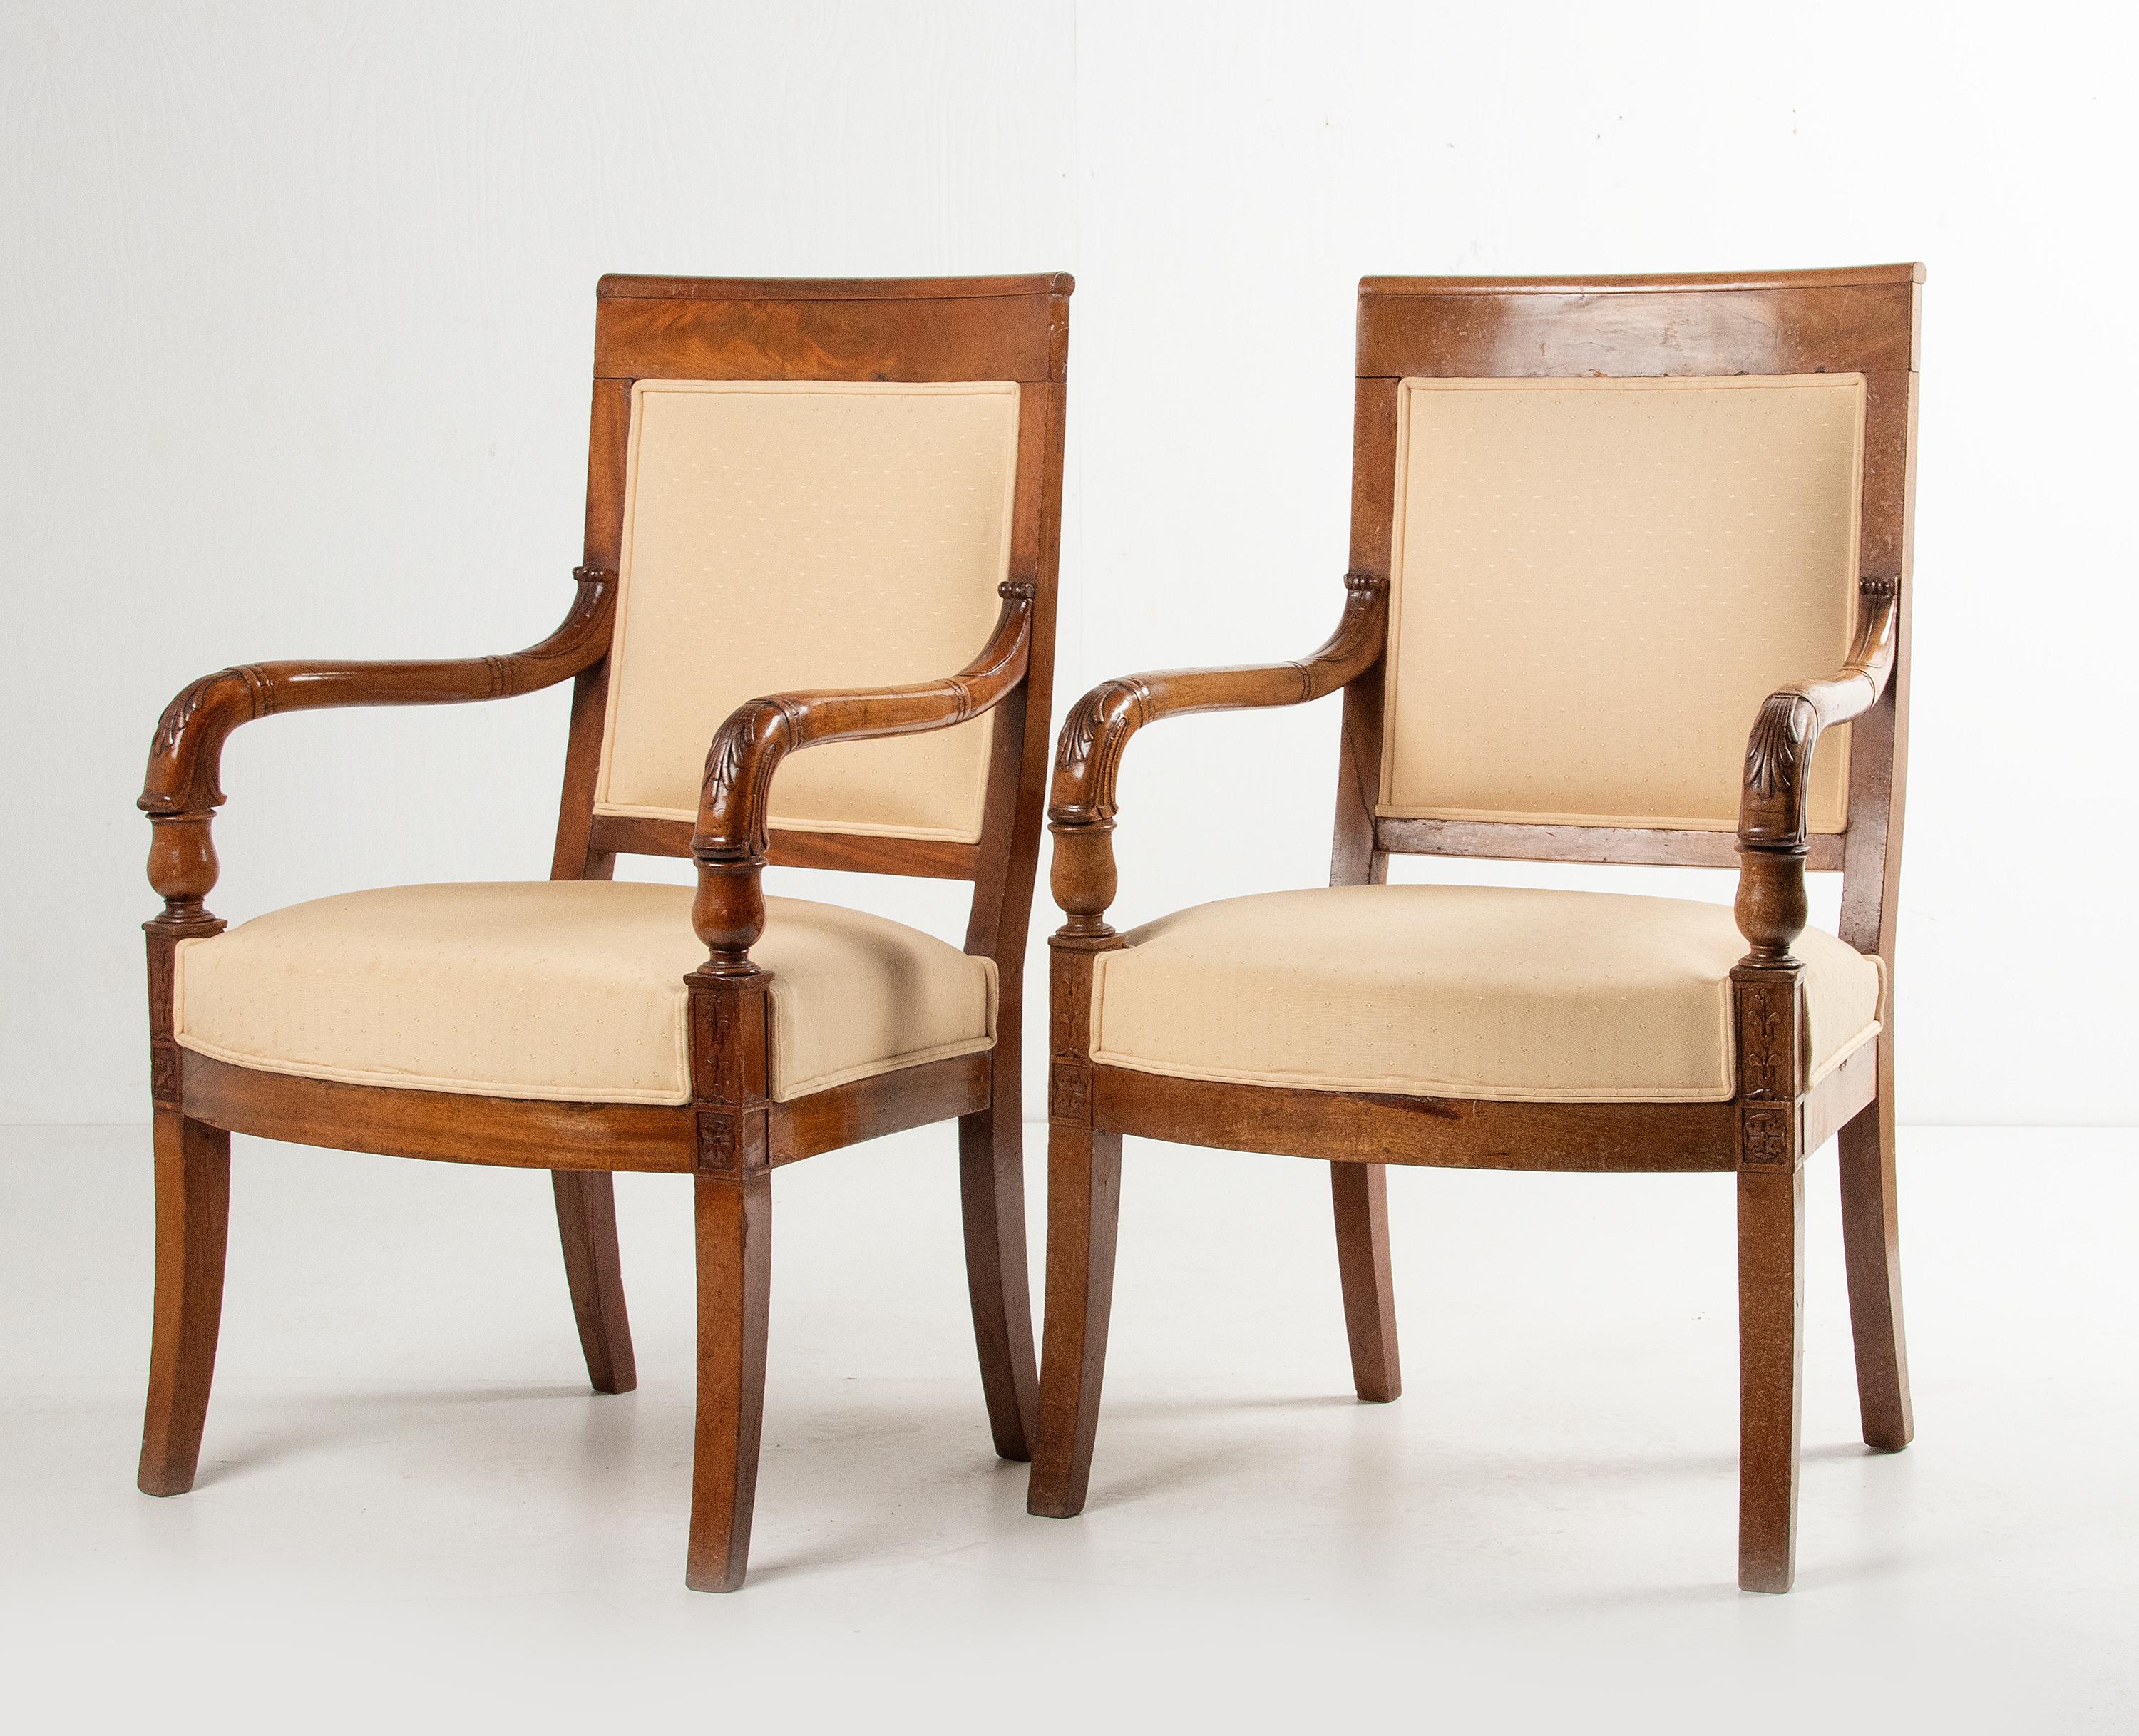 A pair of antique Empire style armchairs. The armrest and legs are made of solid mahogany, the backrest is made of veneered mahogany. An elegant design with curved armrests and tapered Sabres leg. The construction is in good and solid condition, and